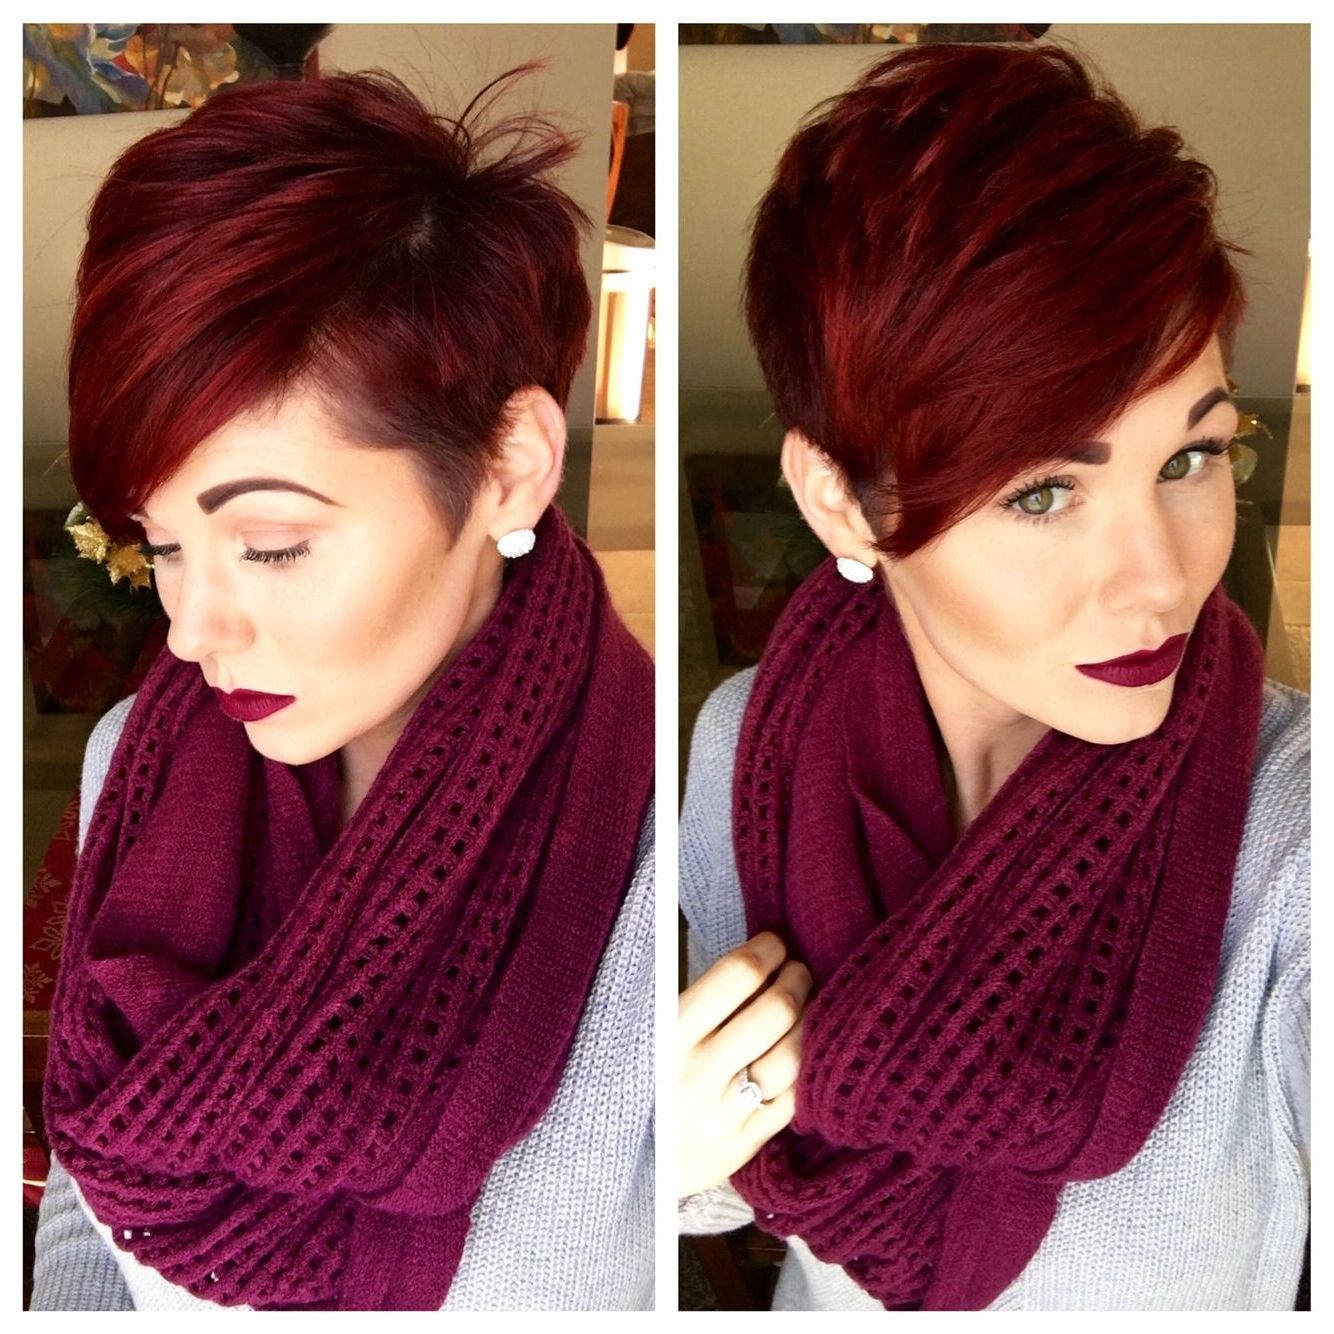 Pixie Cut And Red Violet Hair | Hairstyles/inspiration | Pinterest With Most Current Shaggy Pixie Haircuts In Red Hues (View 3 of 15)